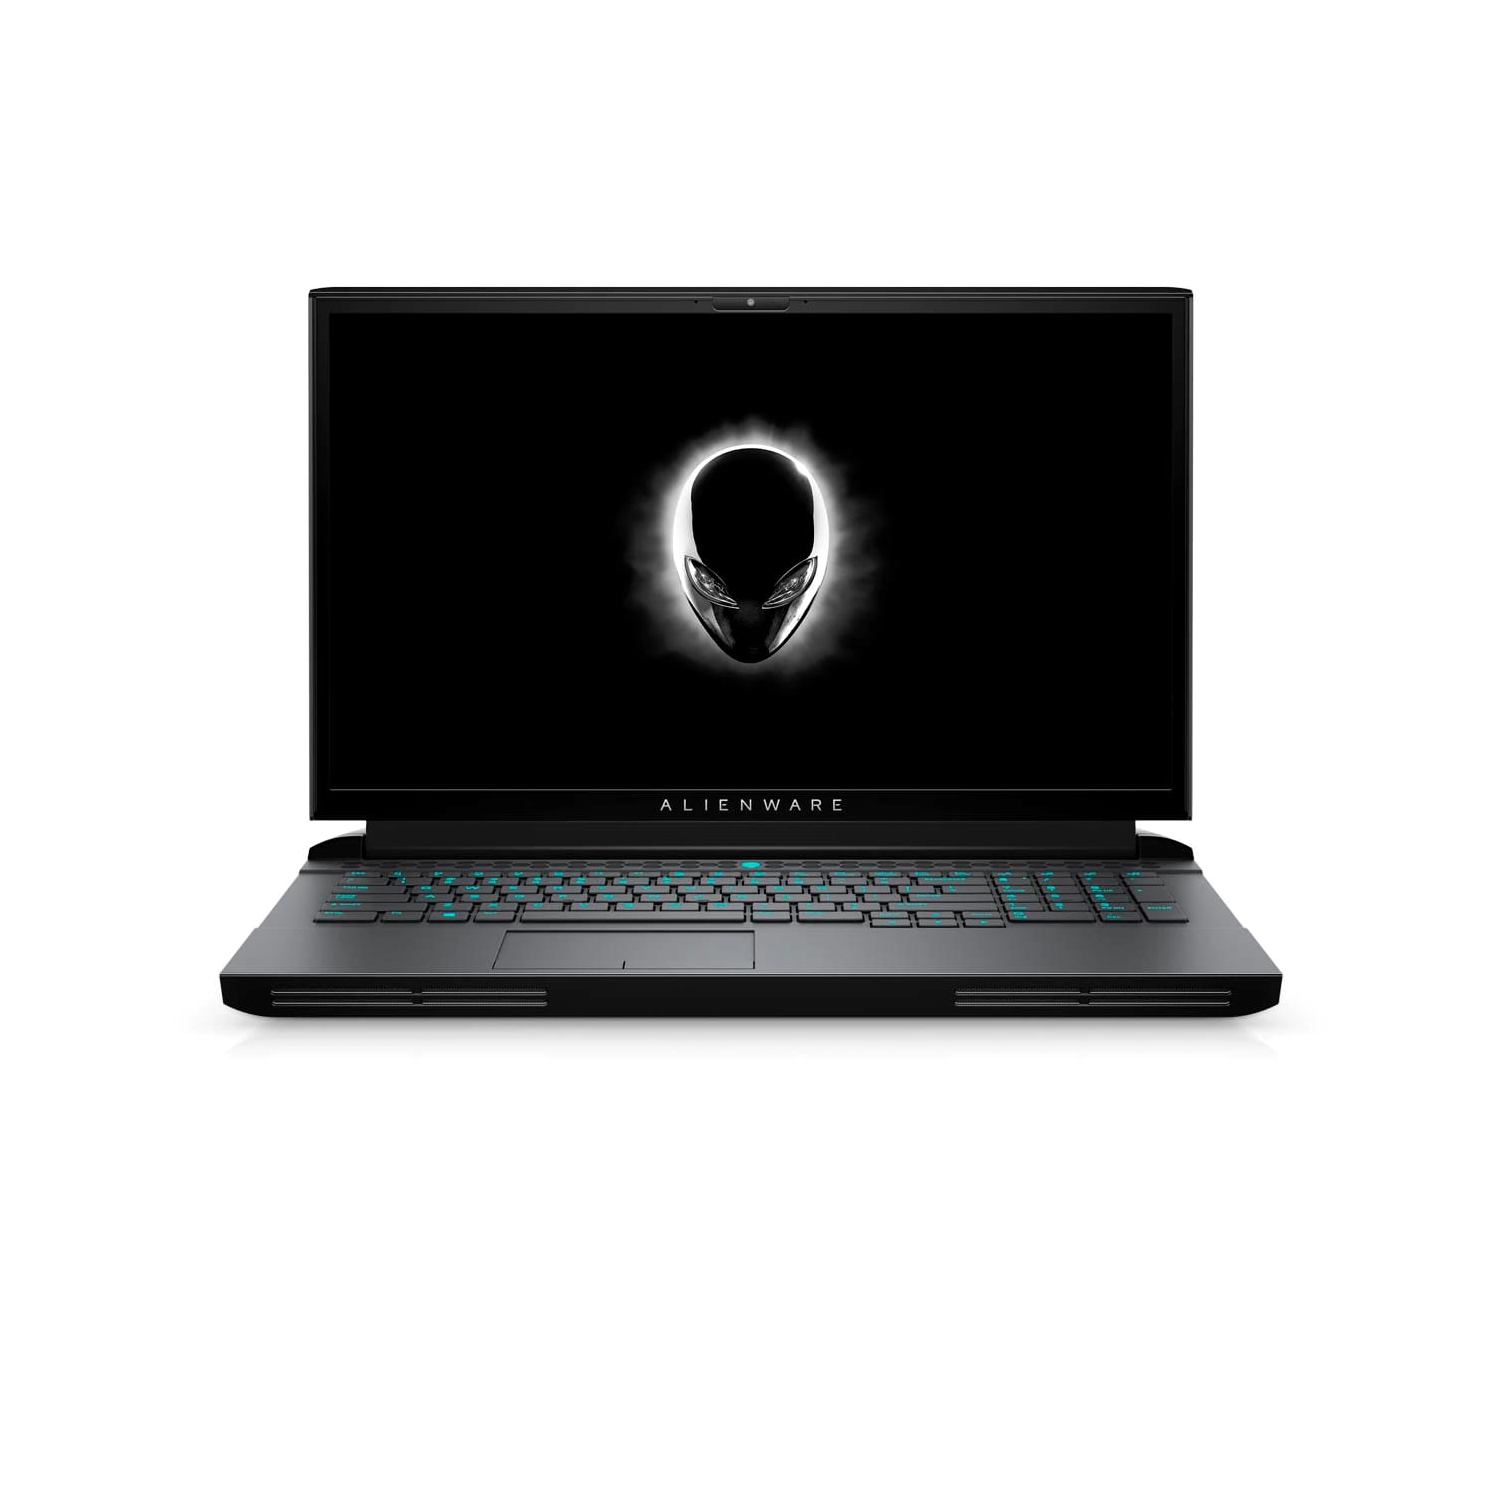 Refurbished (Excellent) - Dell Alienware 17 51m R2 Gaming Laptop (2020), 17.3" FHD, Core i7 - 1TB SSD + 1TB SSD - 64GB RAM - 2070 Super, 4.8 GHz - 10th Gen CPU Certified